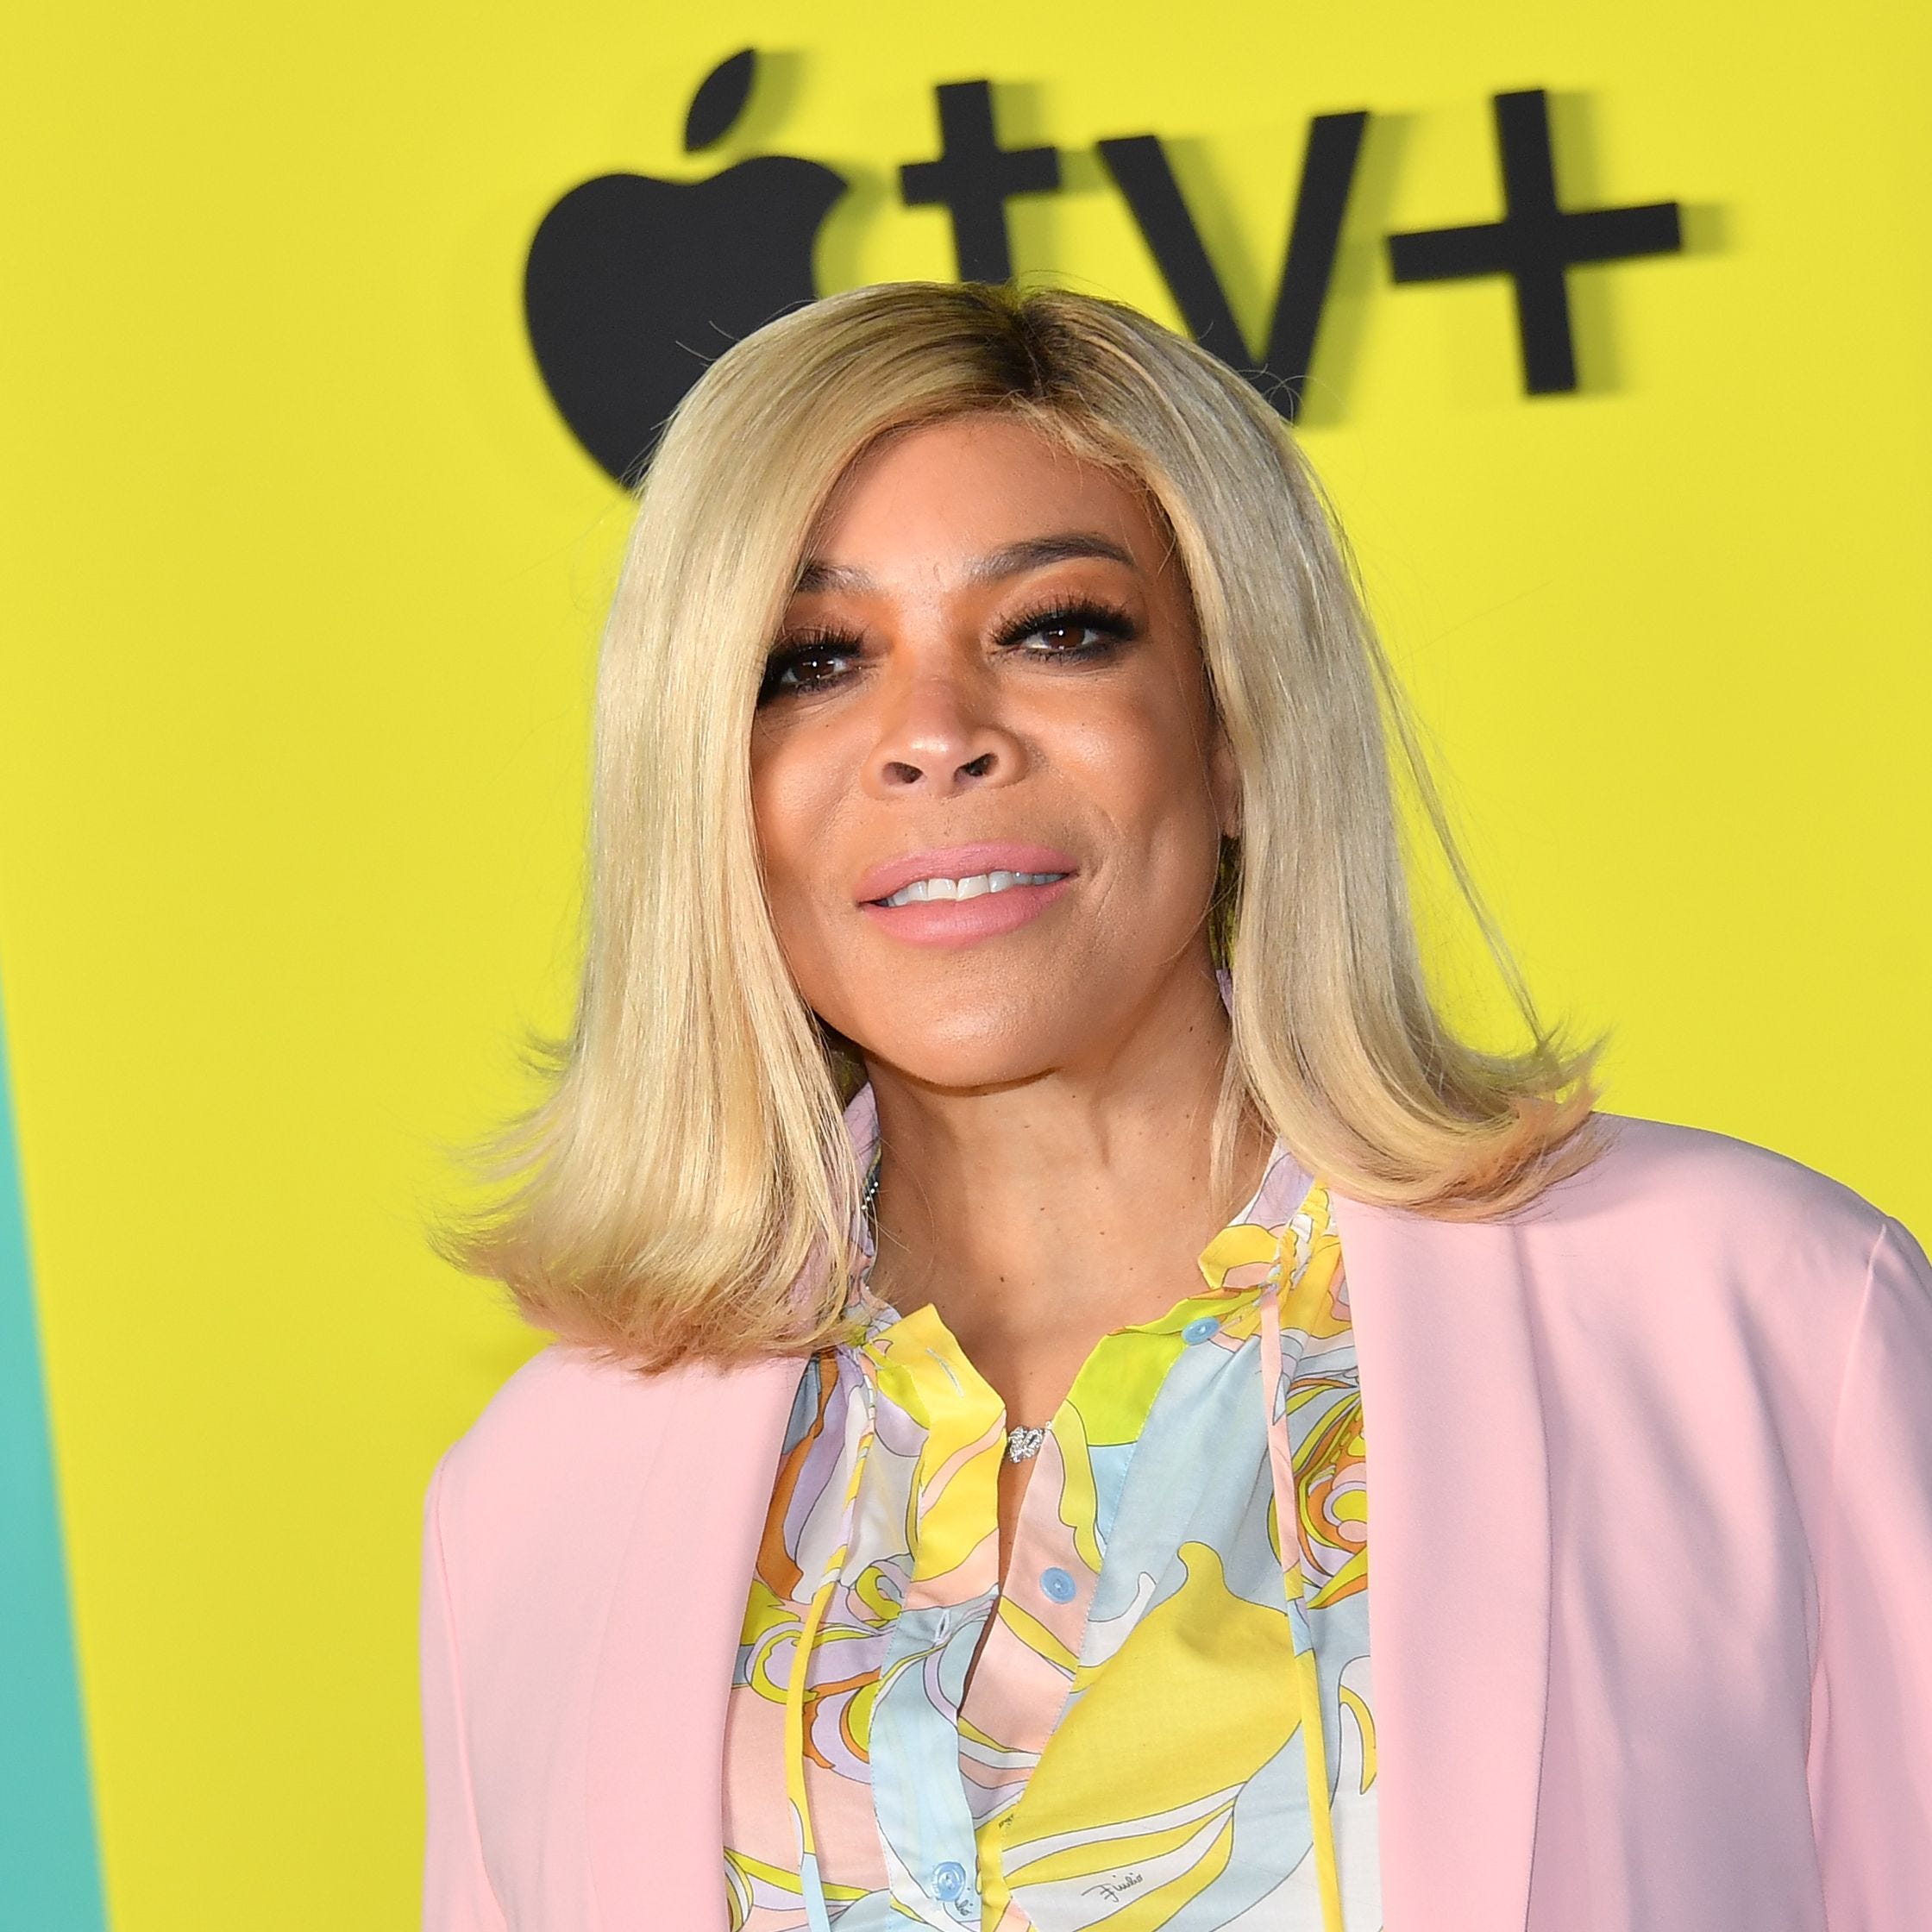 US television presenter Wendy Williams arrives for Apples "The Morning Show" global premiere at Lincoln Center- David Geffen Hall on October 28, 2019 in New York. (Photo by ANGELA WEISS / AFP) (Photo by ANGELA WEISS/AFP via Getty Images) ORG XMIT: Apple's " ORIG FILE ID: AFP_1LT6FI